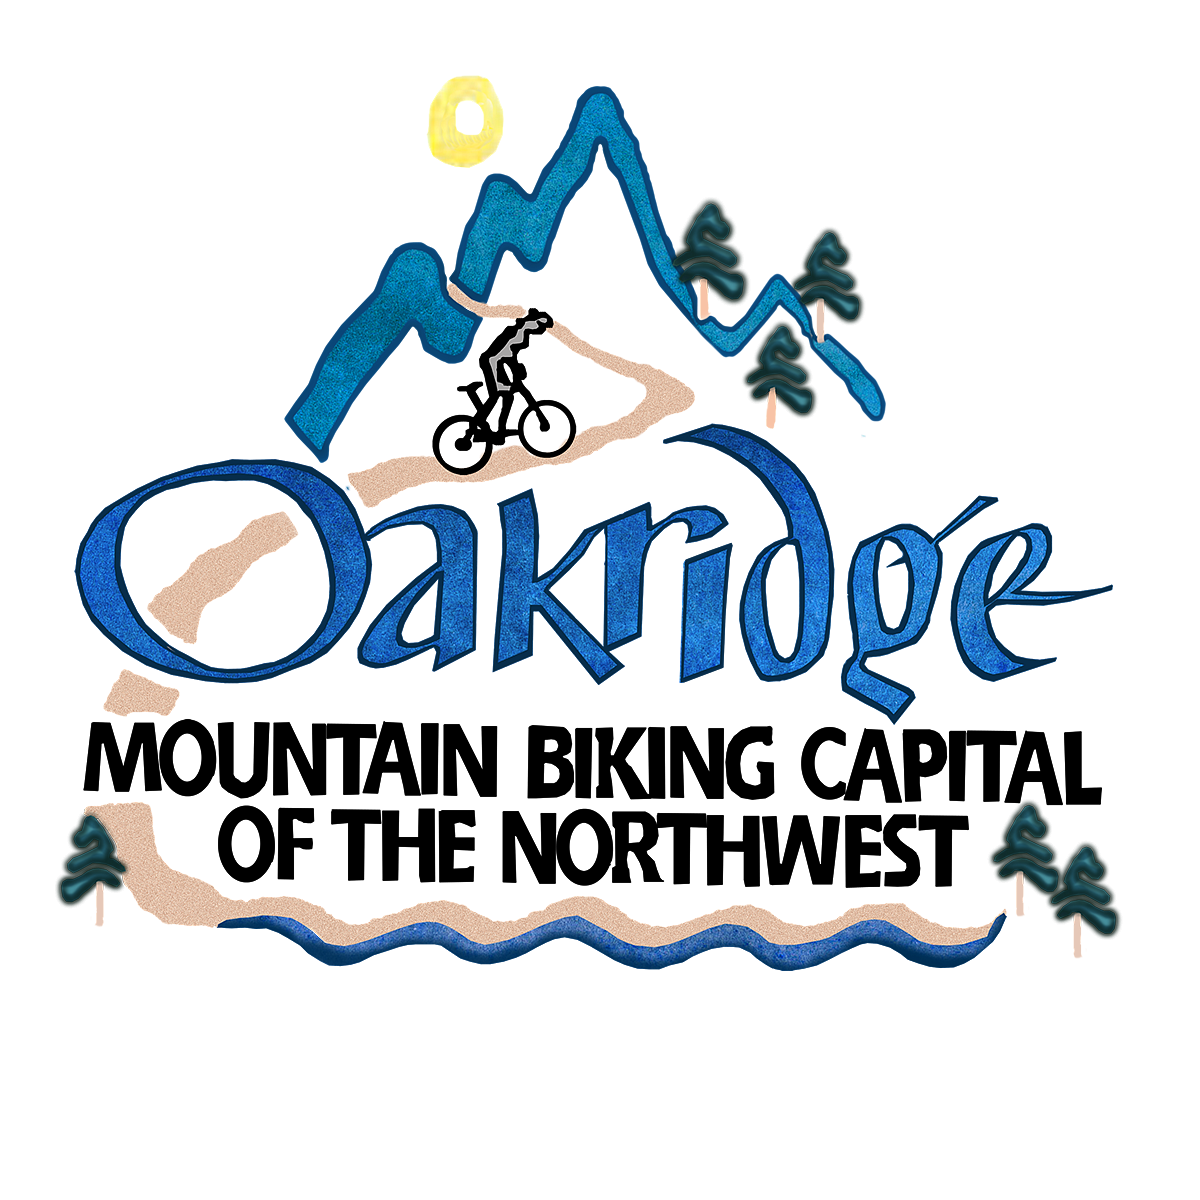 City of Oakridge logo in blue with imagery of mountains and person on bike